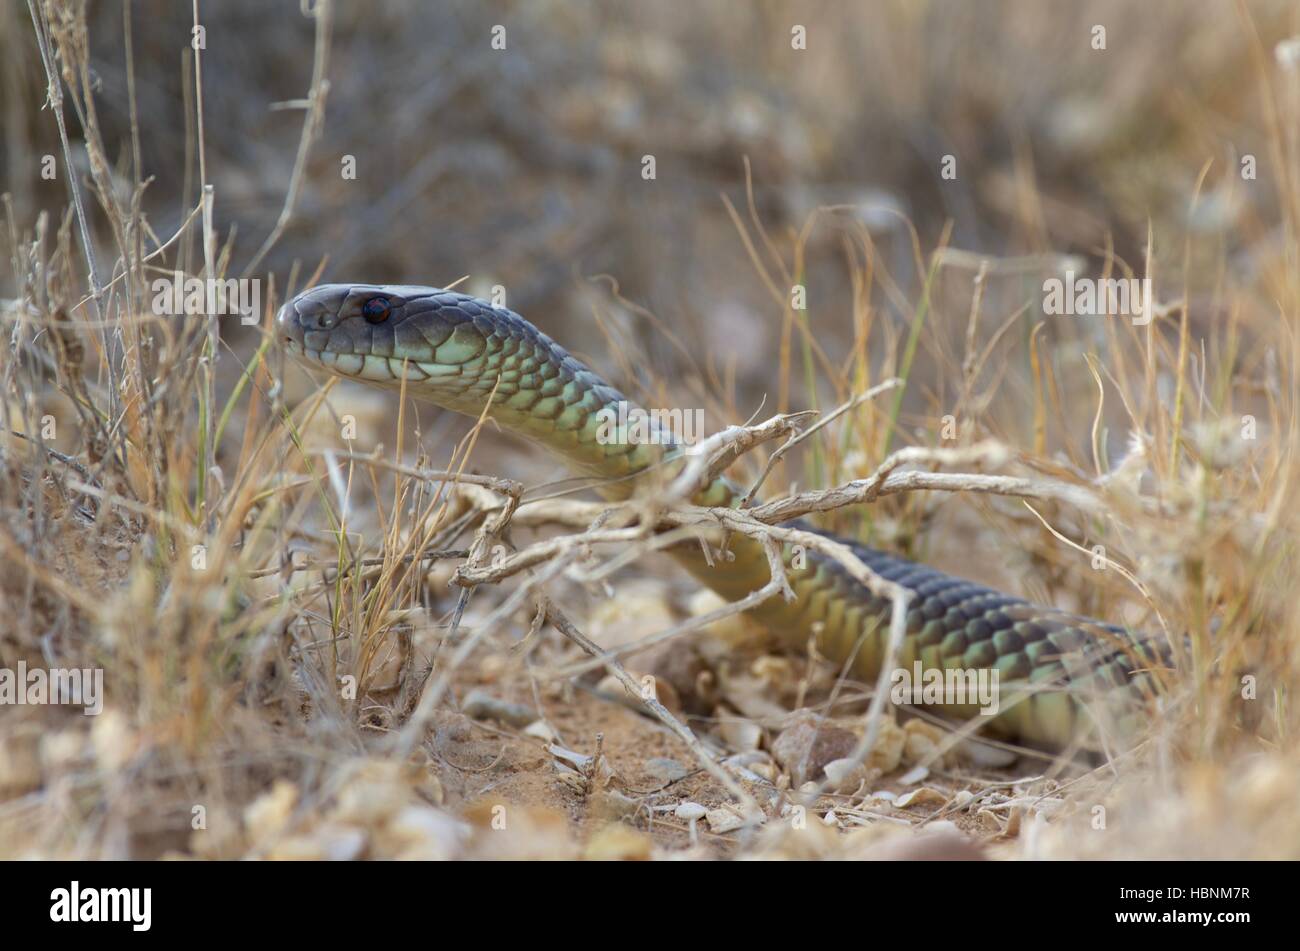 Close-up of a Mulga or King Brown snake (Pseudechis australis) in vegetation south of Marree, South Australia Stock Photo